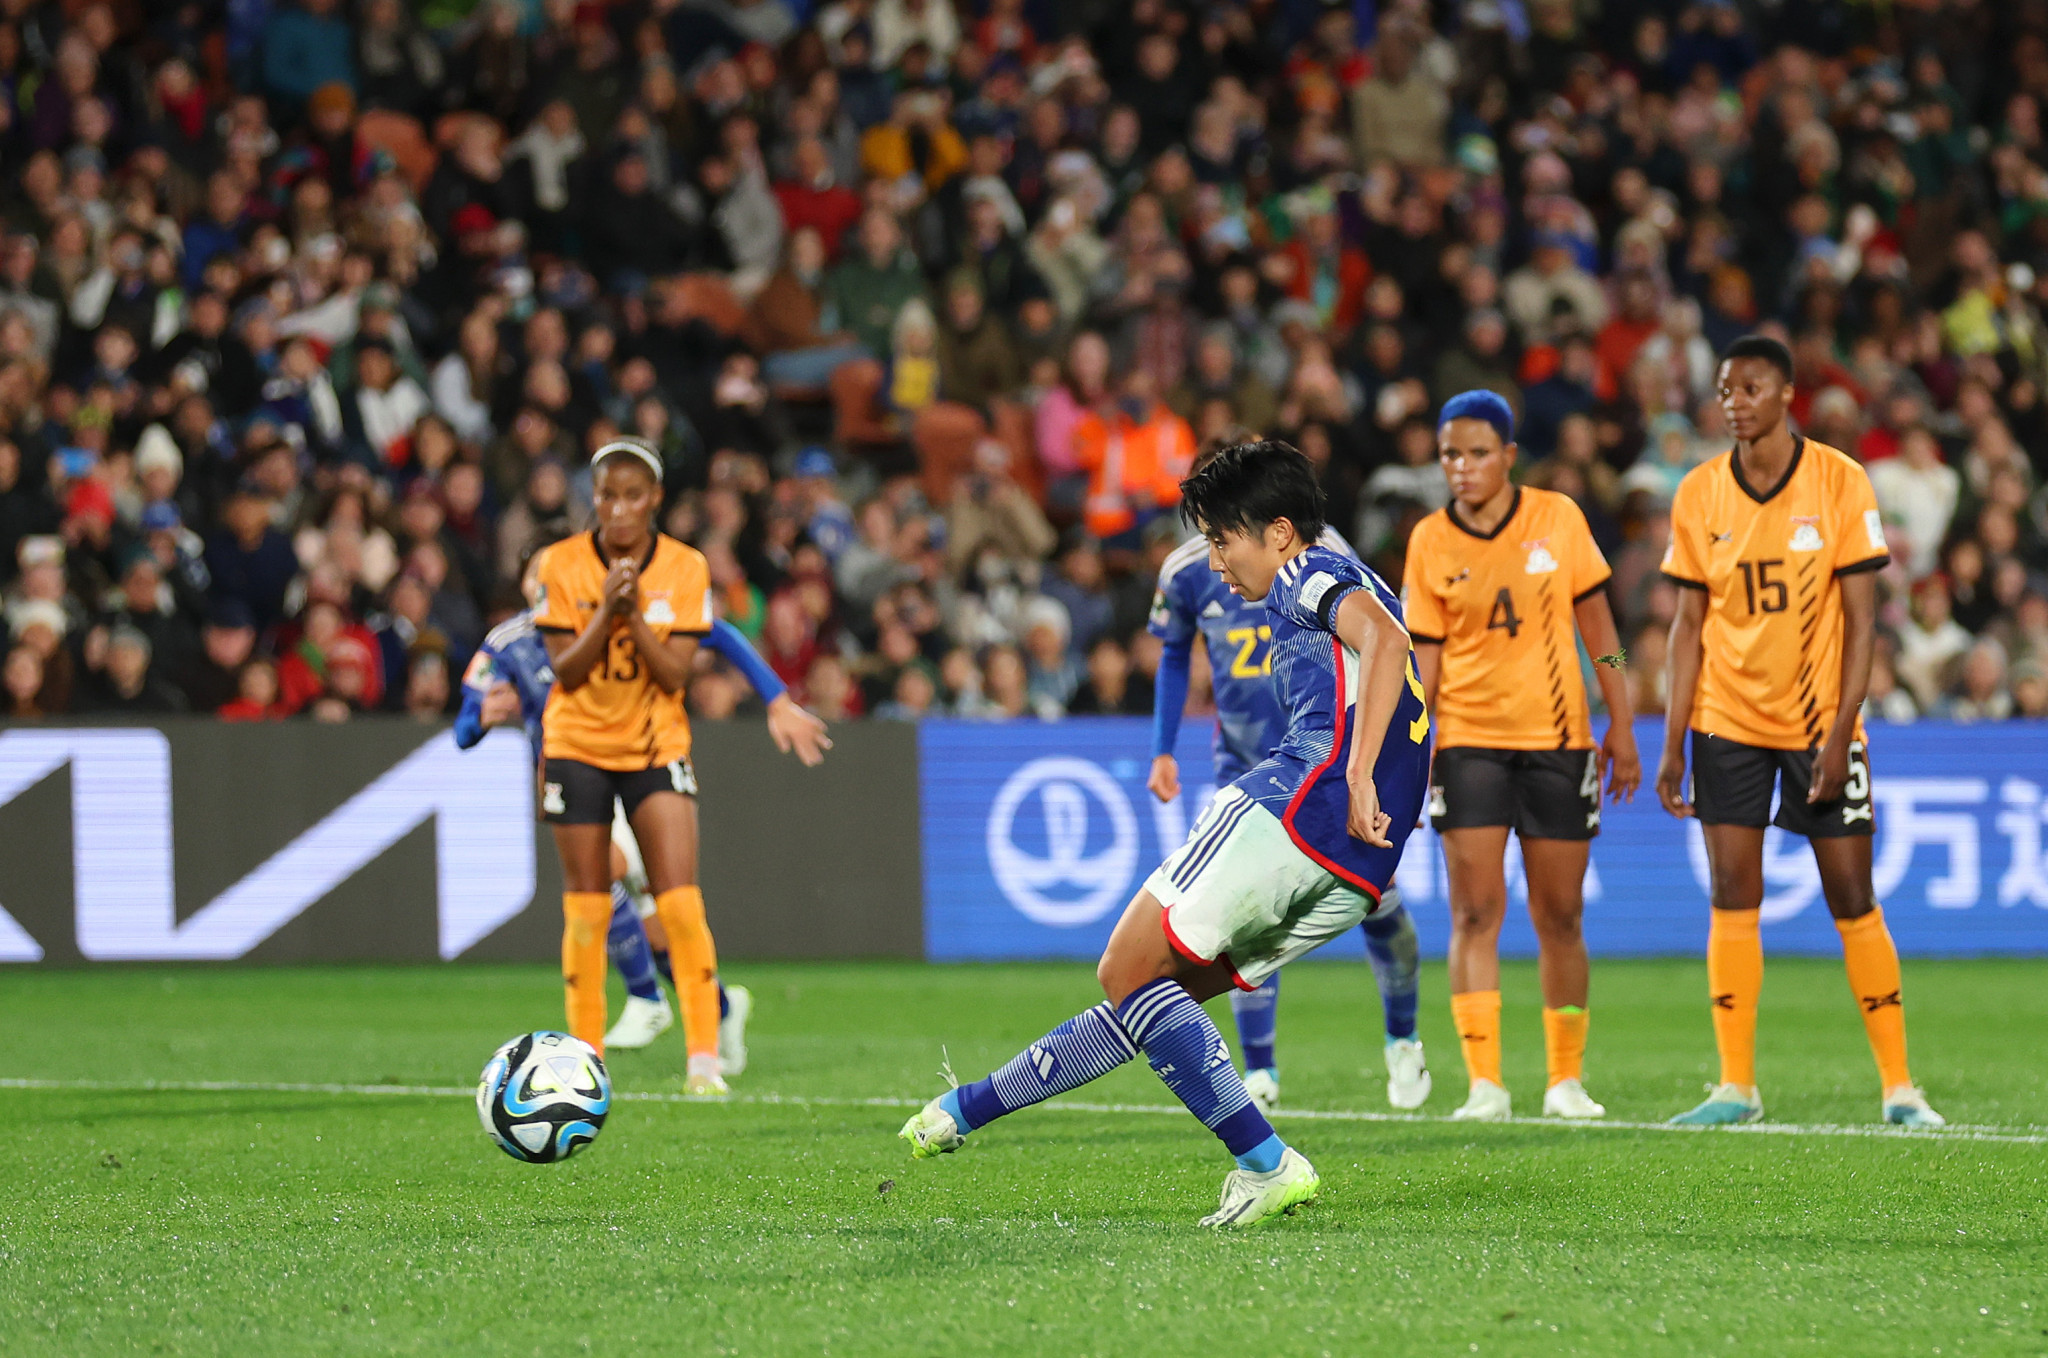 A penalty in the 11th minute of second half injury time from Riko Ueki, front, rounded off Japan's 5-0 win against Zambia ©Getty Images